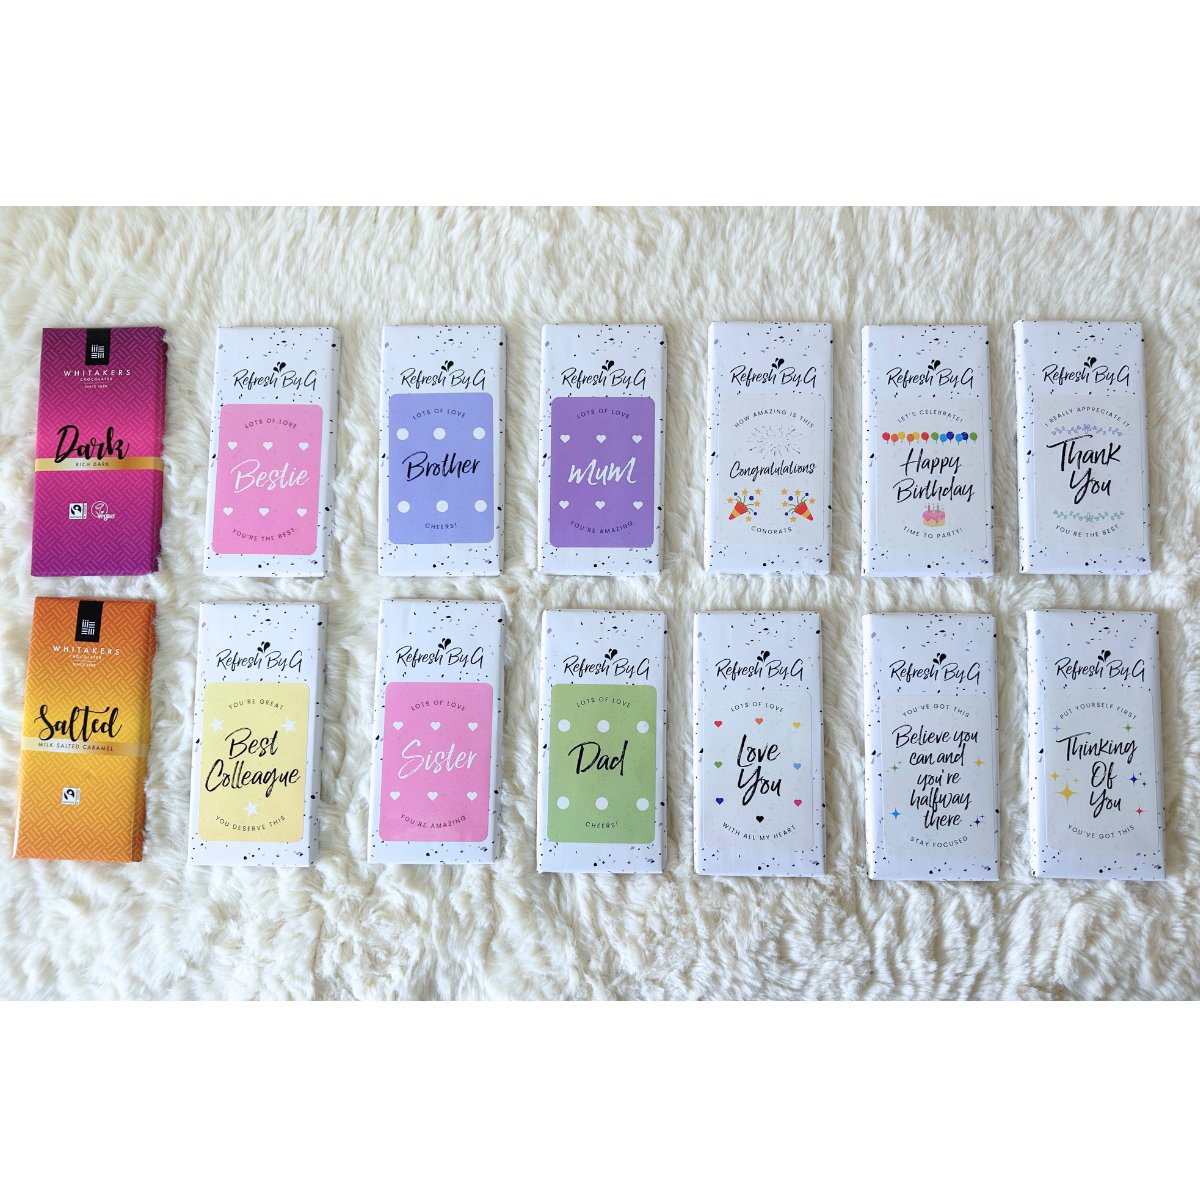 Range of chocolate bars which customers can choose from when they order &